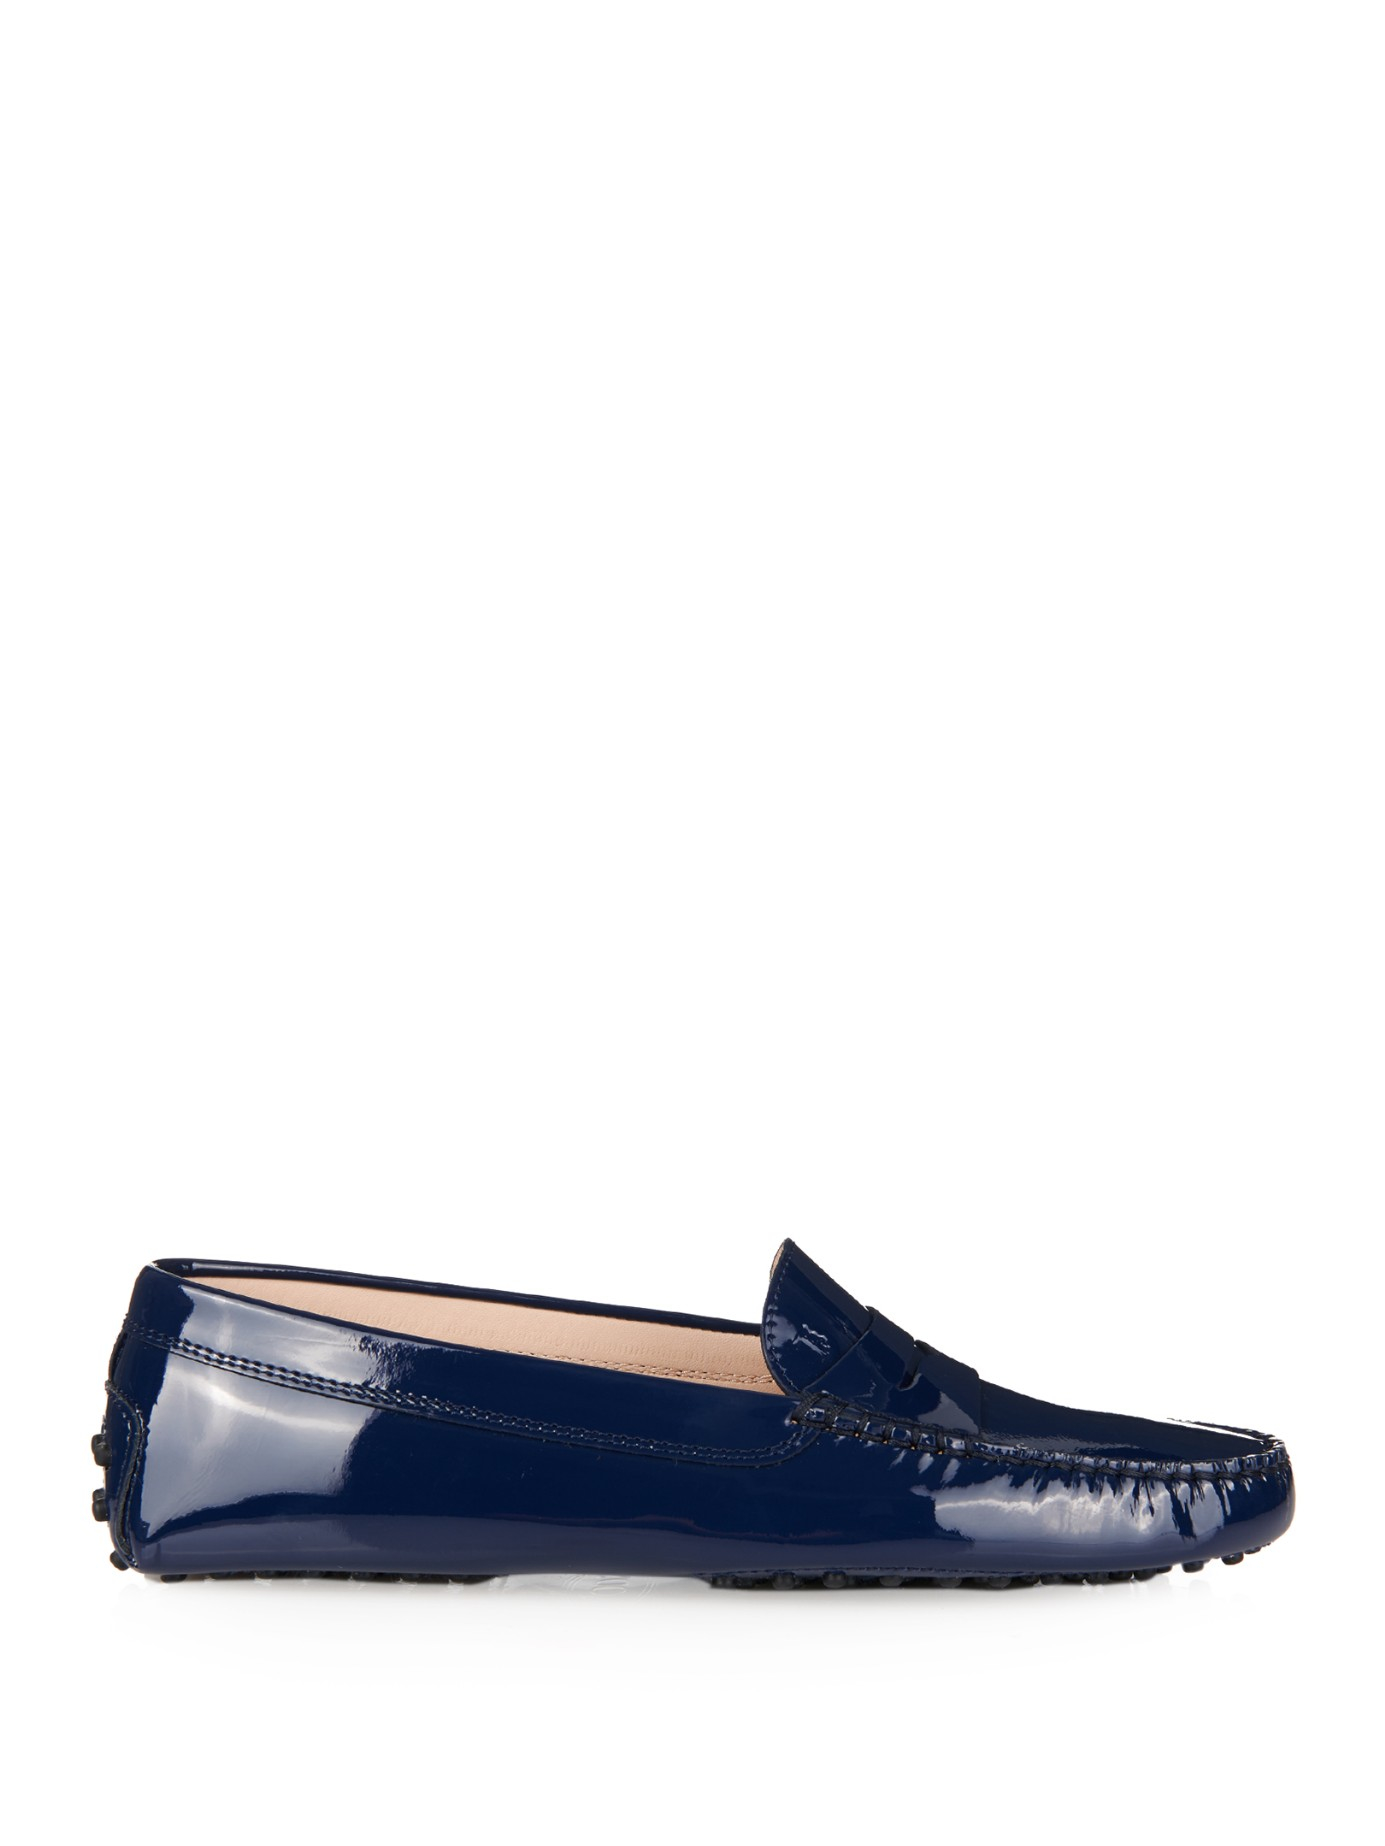 Tod's Gommino Patent-Leather Loafers in Blue | Lyst